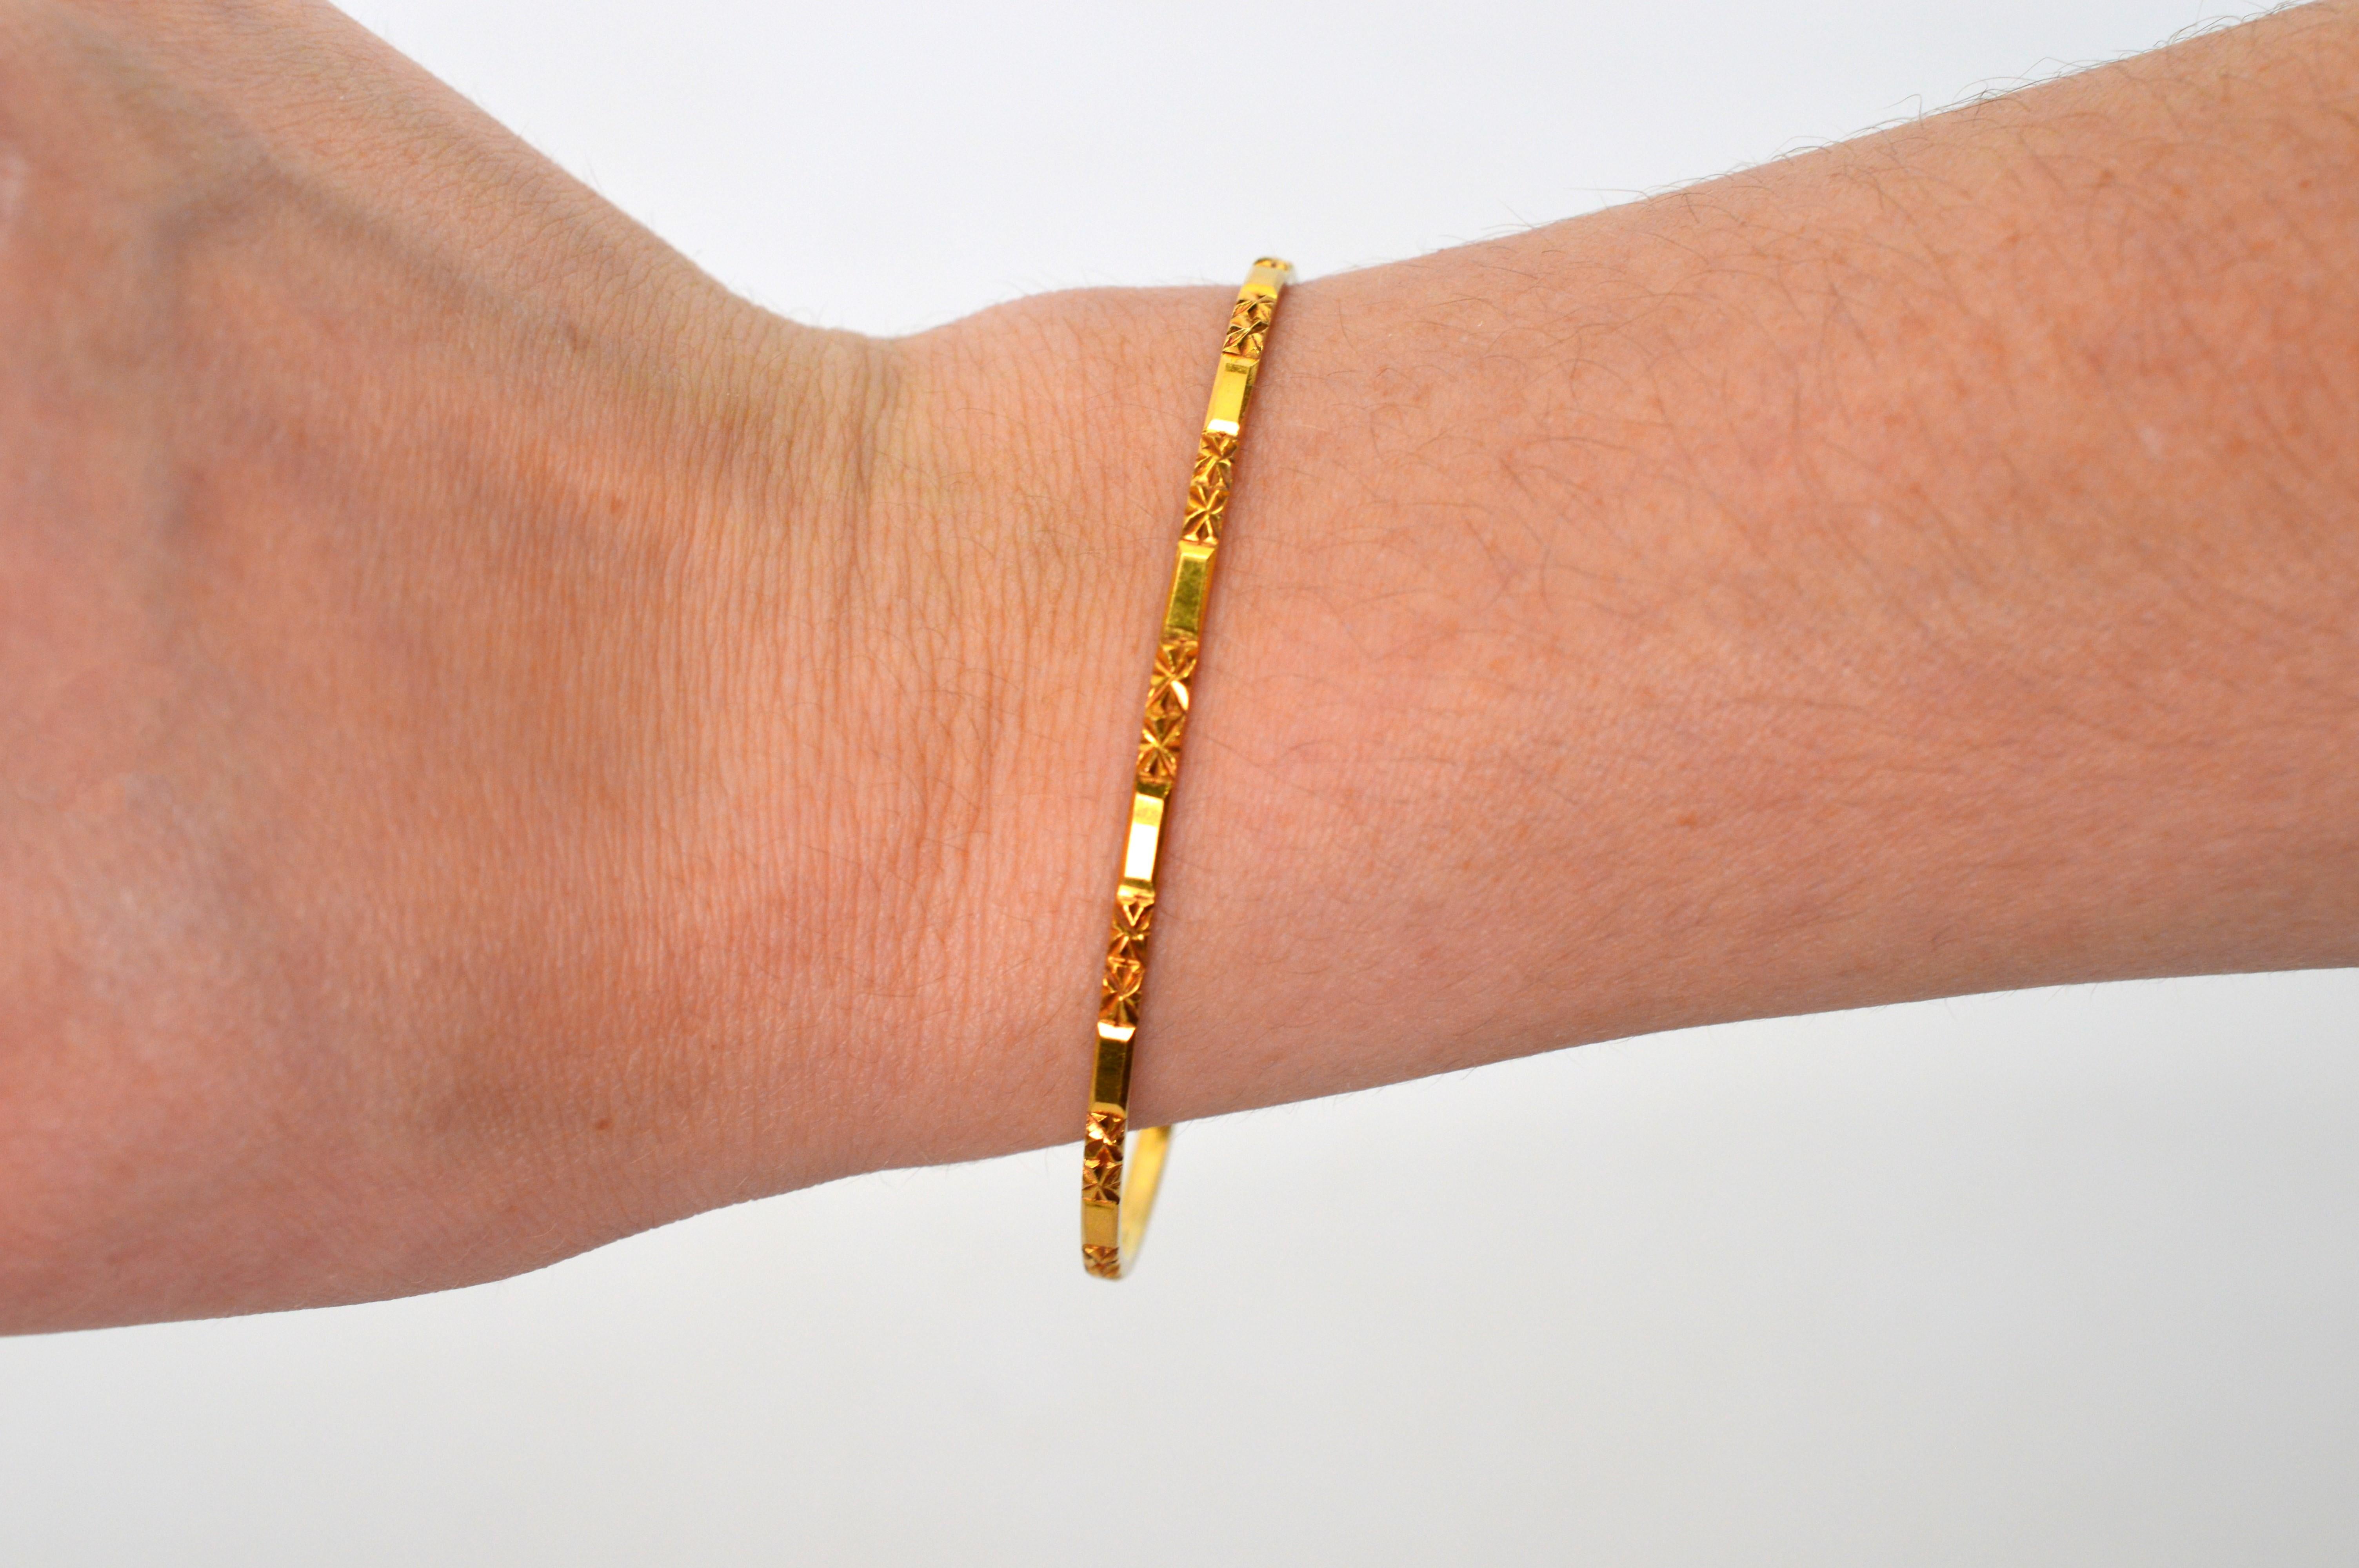 Ultra Slim 18 Karat Yellow Gold Bangle Bracelet In Good Condition For Sale In Mount Kisco, NY